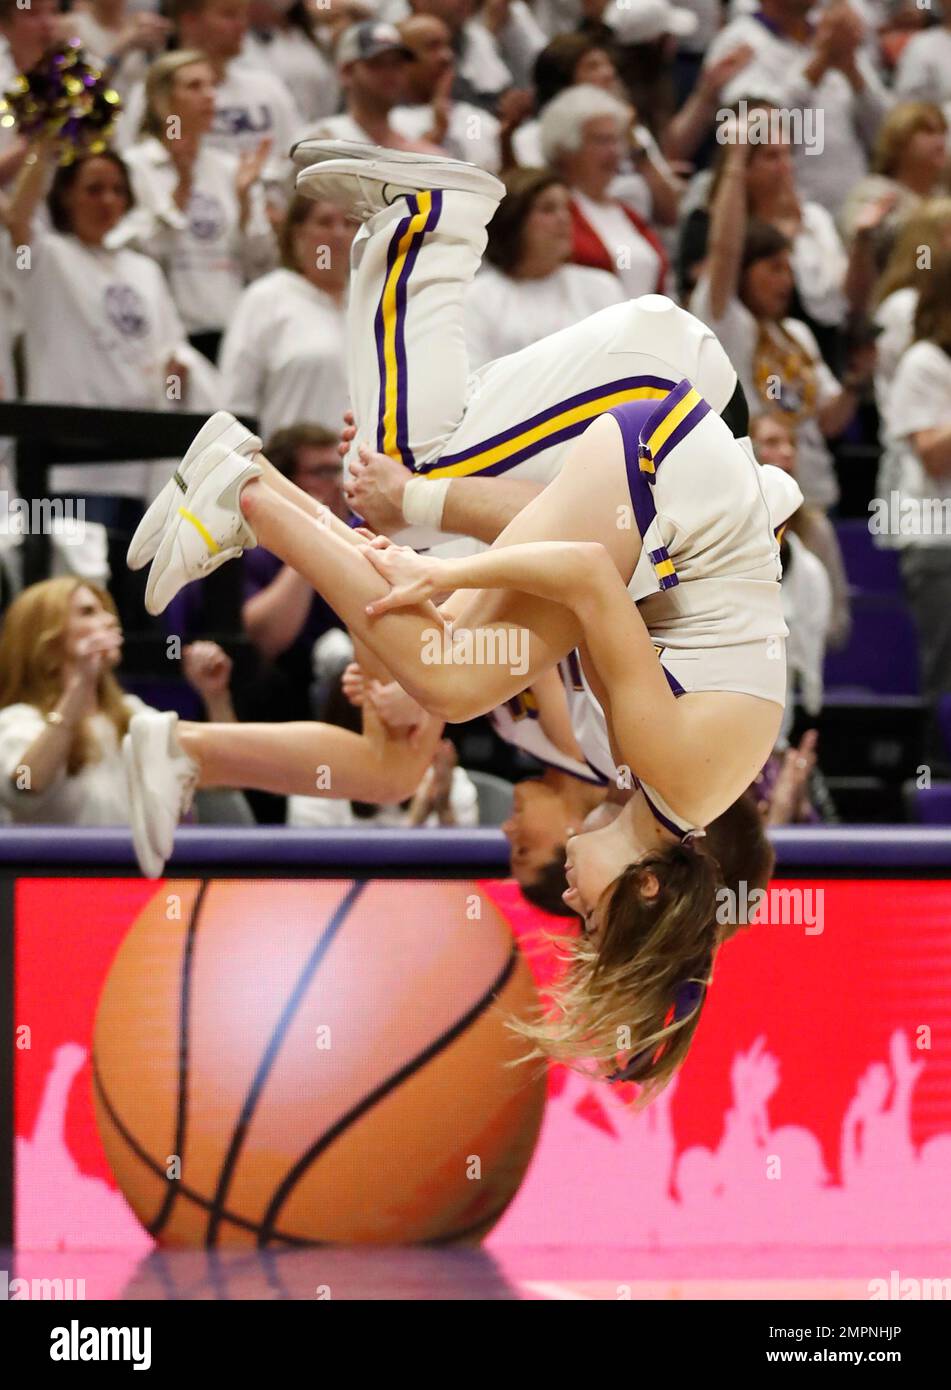 Baton Rouge, USA. 30th Jan, 2023. The LSU cheerleaders all do a flip after the Lady Tigers make a free throw during a women's college basketball game at the Pete Maravich Assembly Center in Baton Rouge, Louisiana on Monday, January 30, 2022. (Photo by Peter G. Forest/Sipa USA) Credit: Sipa USA/Alamy Live News Stock Photo